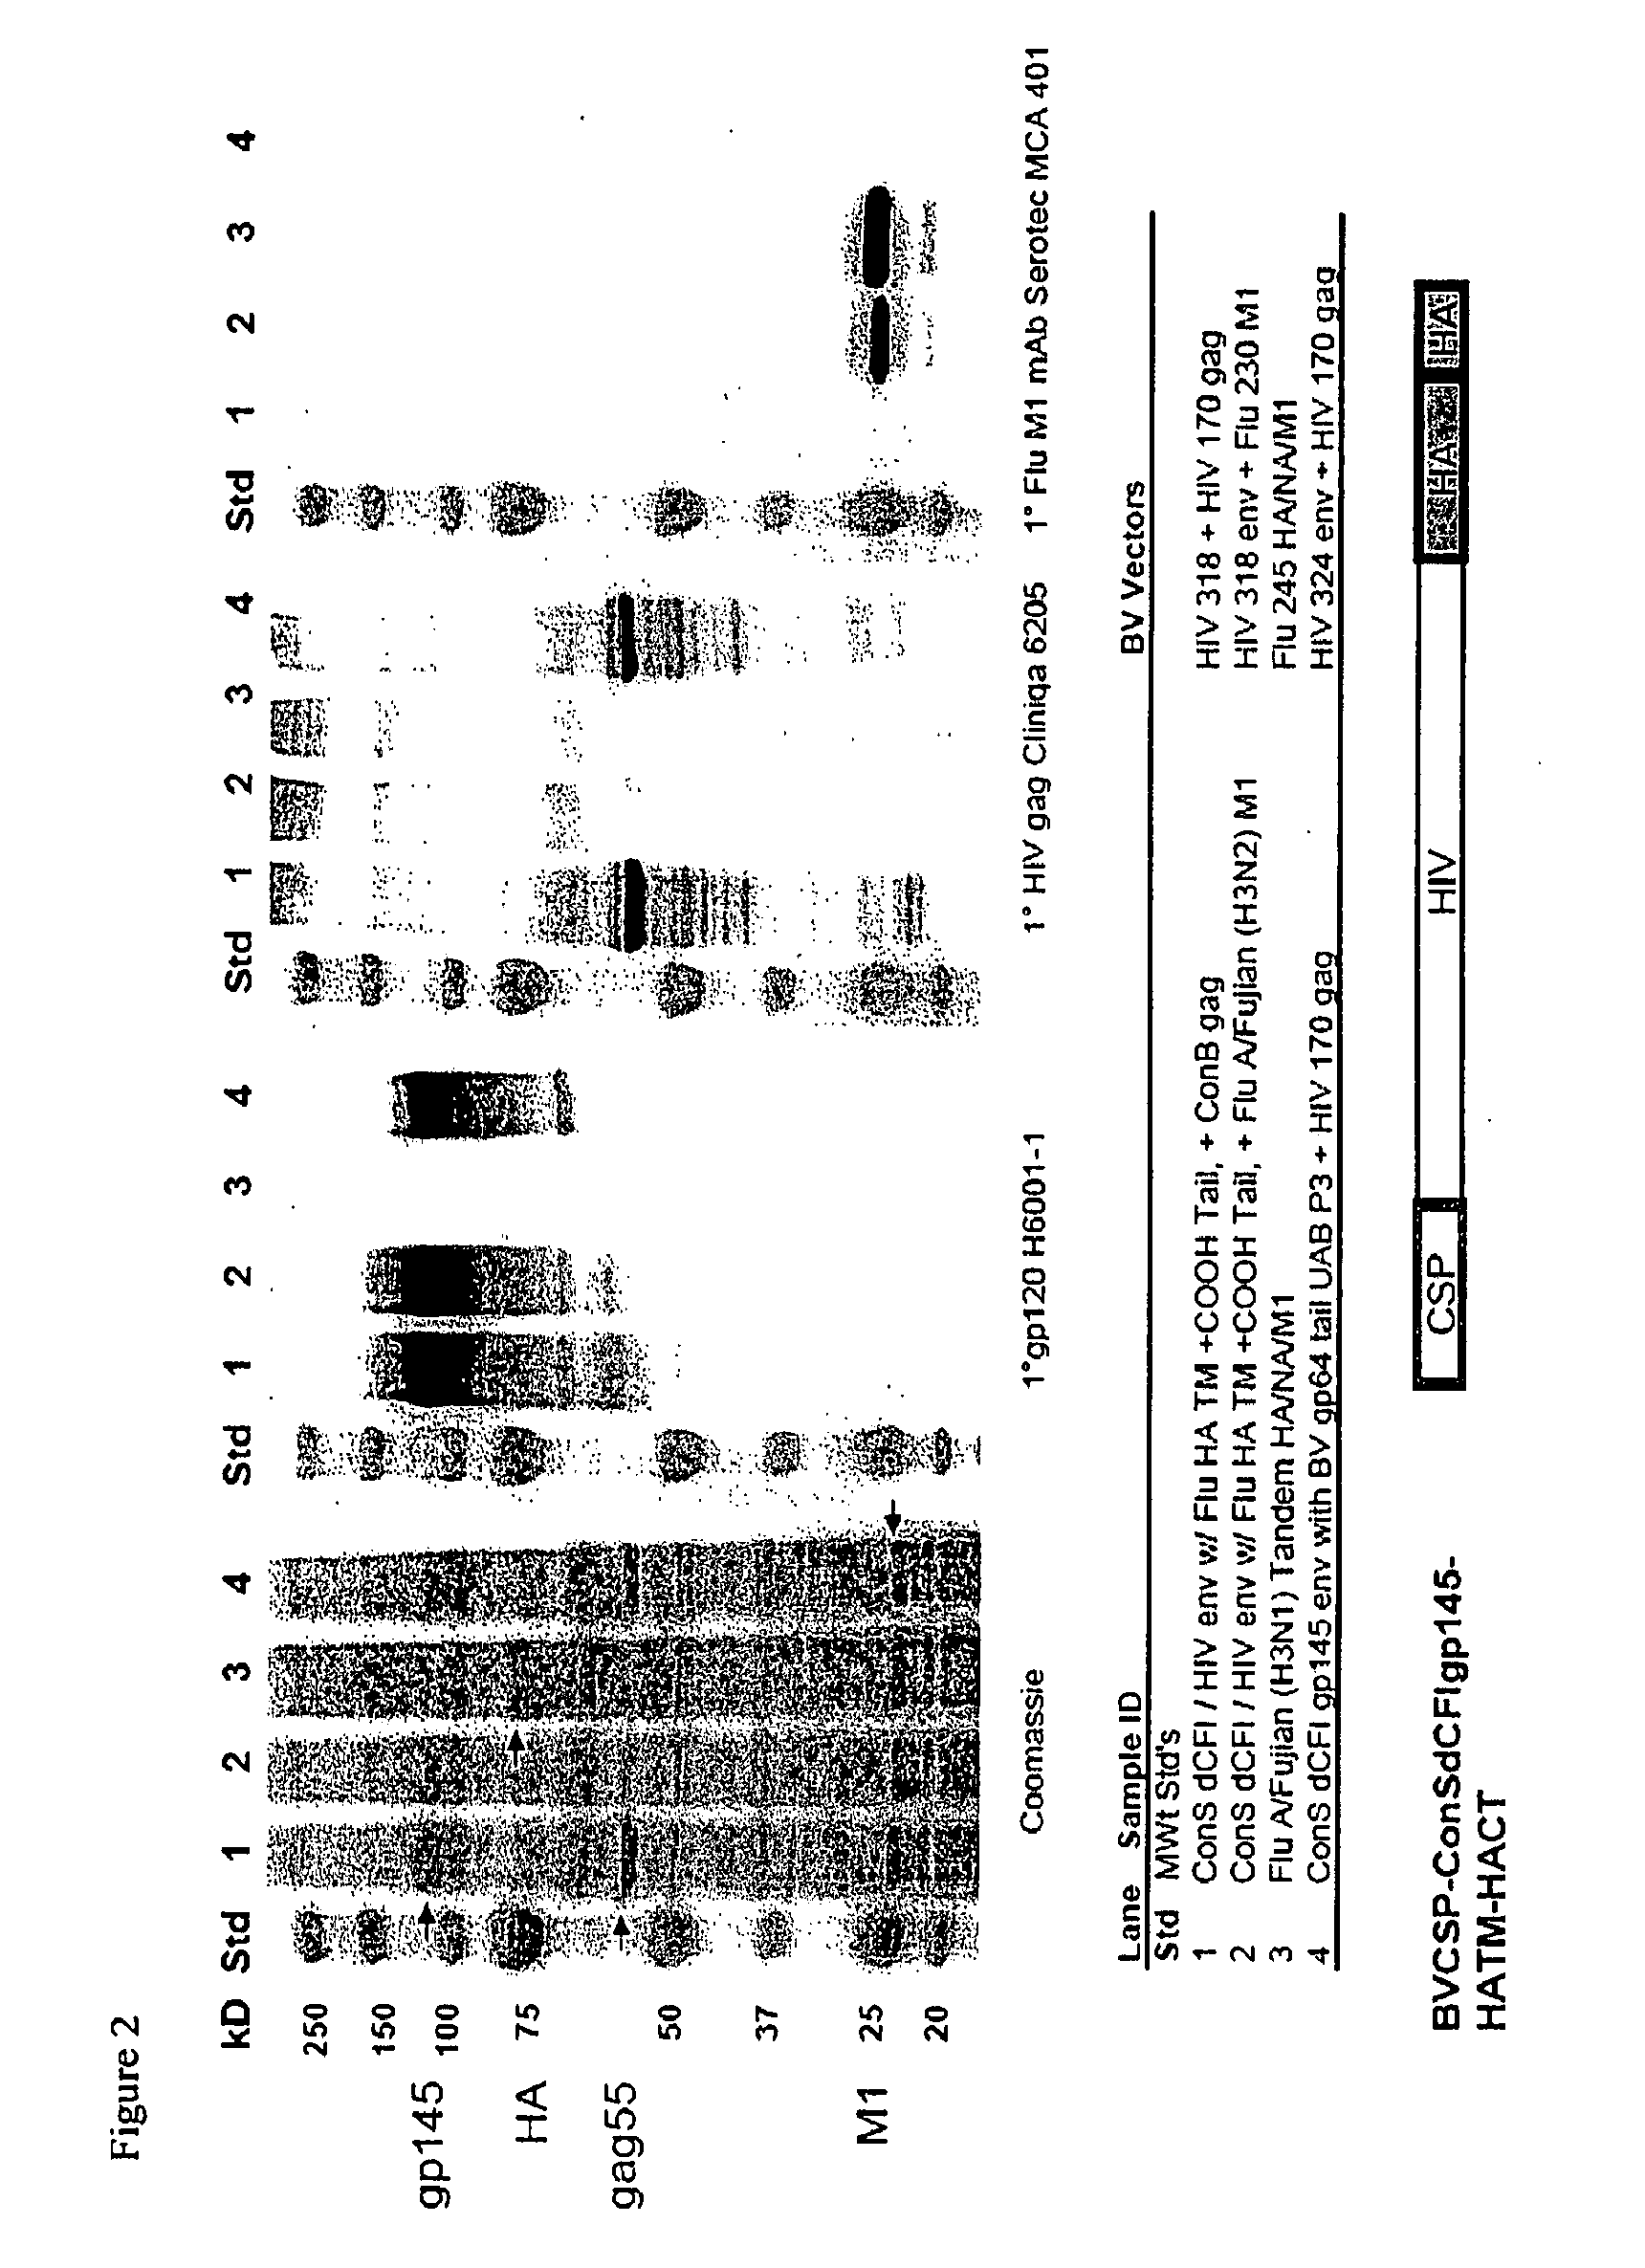 Methods of enhancing protein incorporation into virus like particles